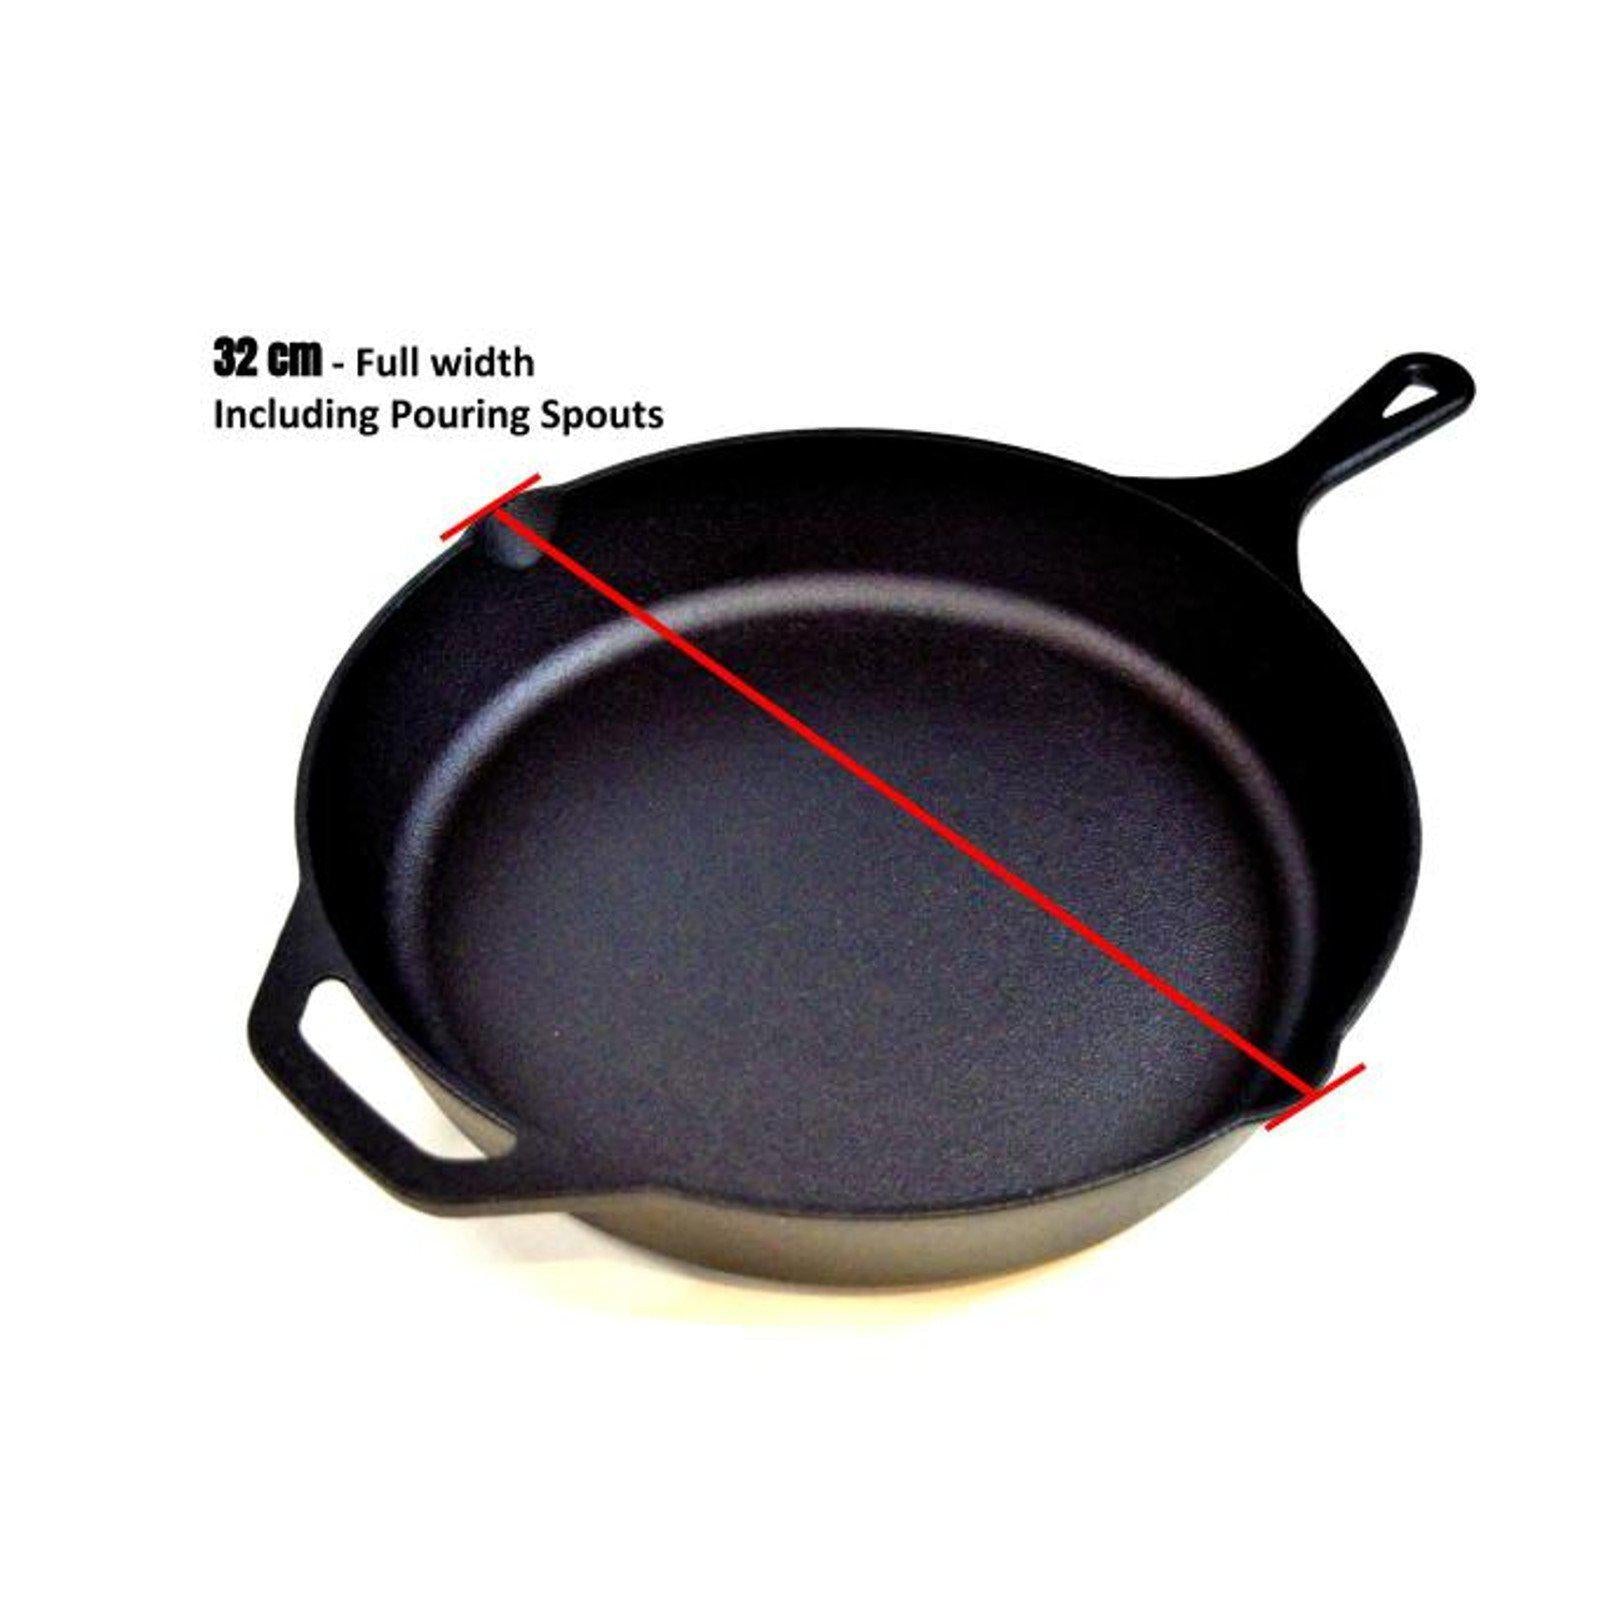 Chef's Quality Black Cast Iron Skillet - Large 30cm Cooking Surface-Frying Pan-Chef's Quality Cookware